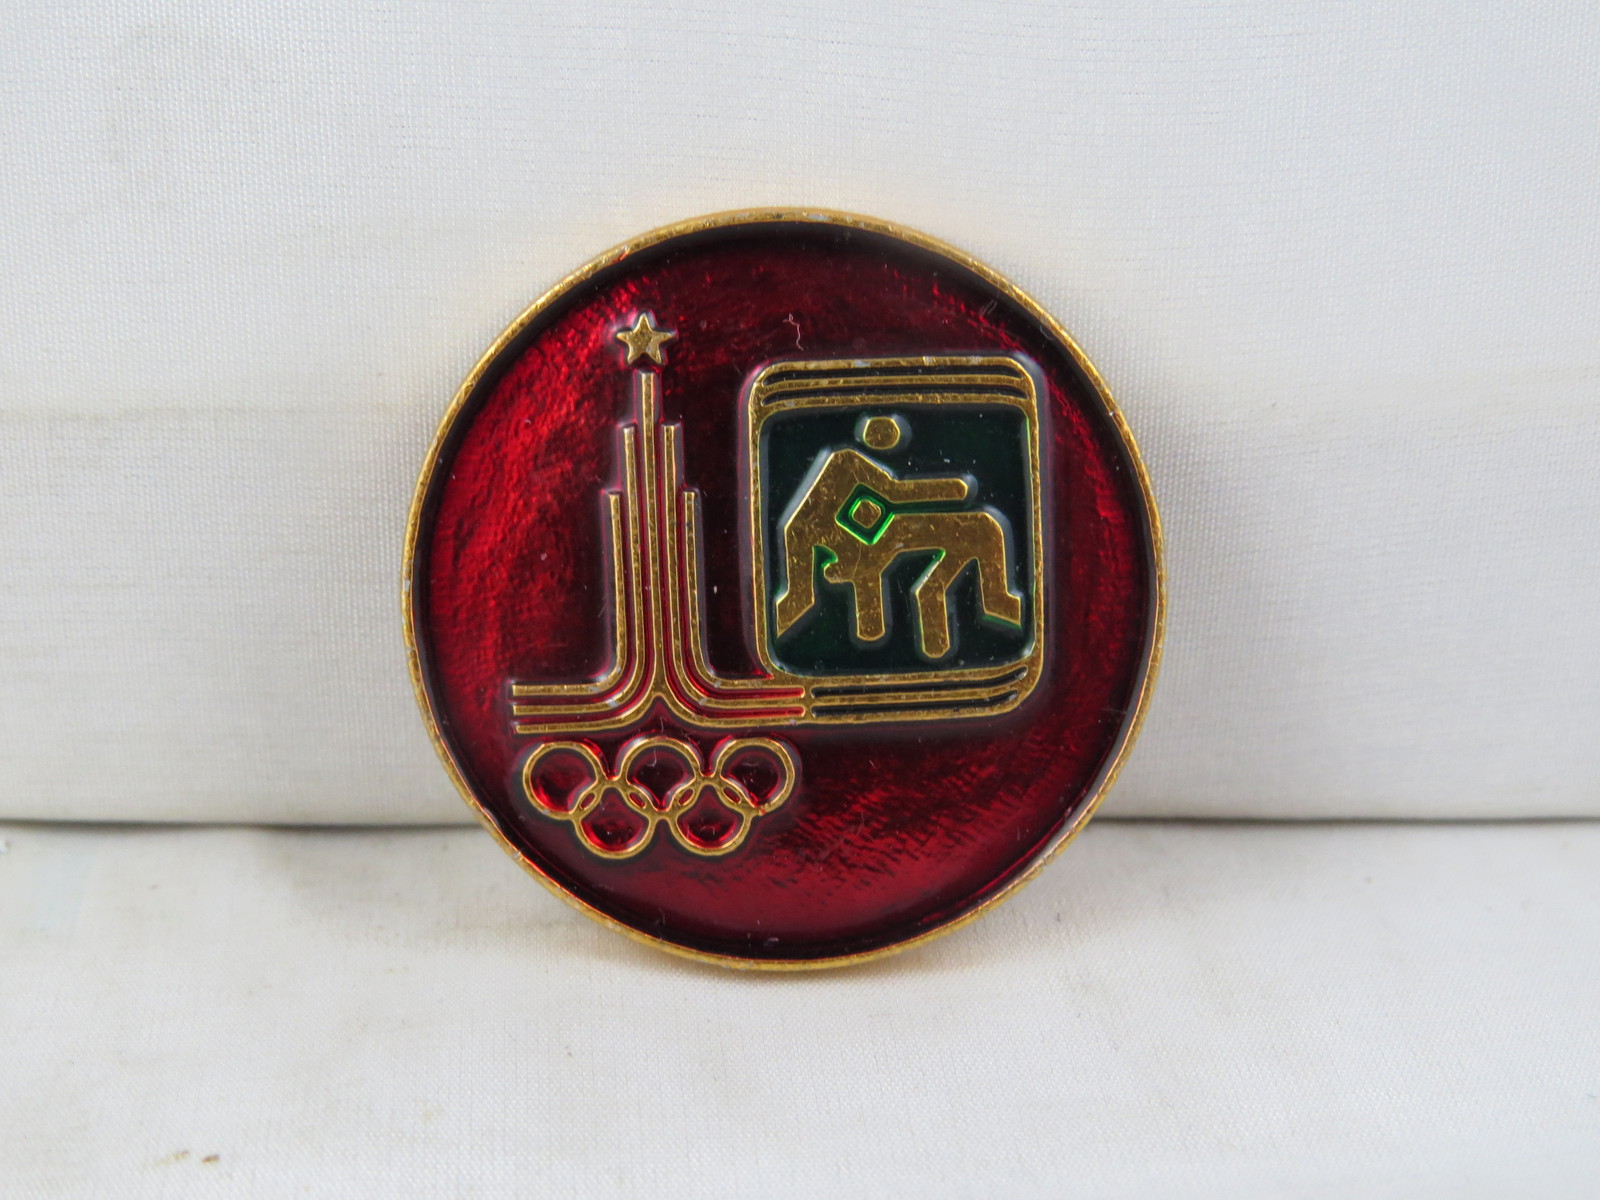 Primary image for Summer Olympic Games Pin - 1980 Moscow Wrestling - Stamped Pin